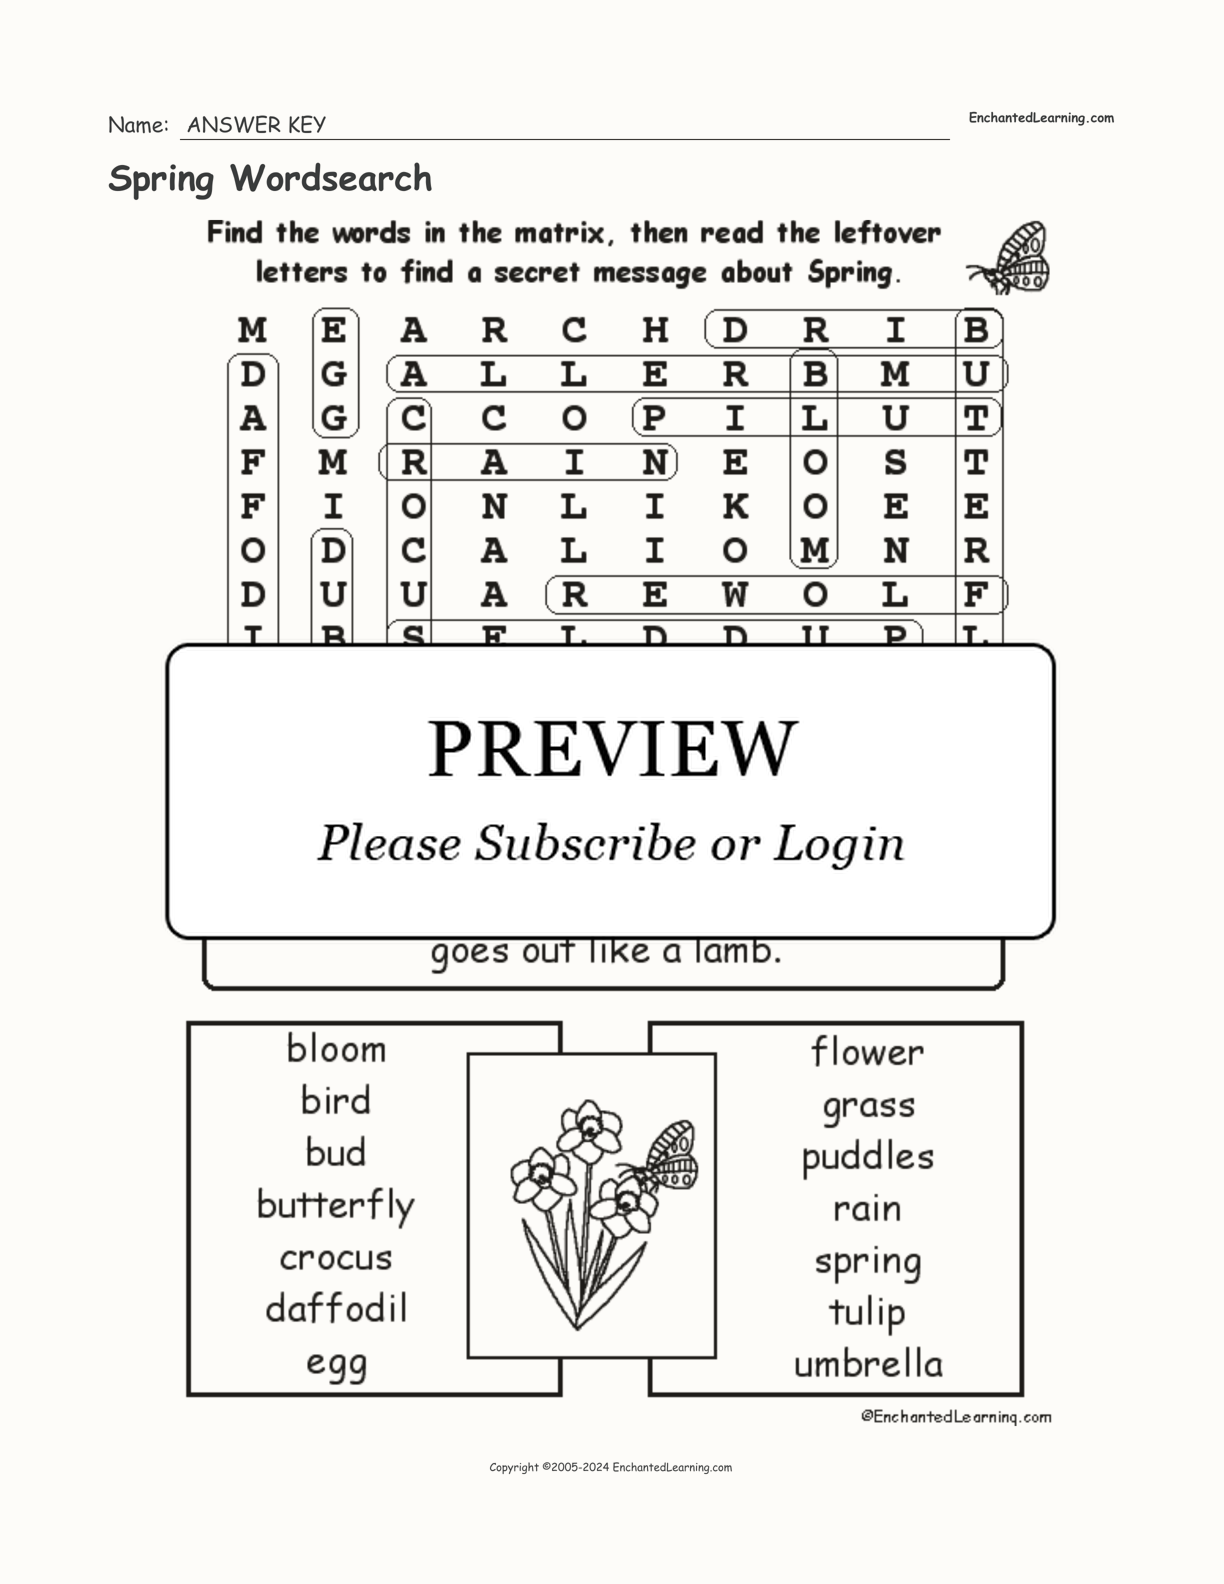 Spring Wordsearch interactive worksheet page 2